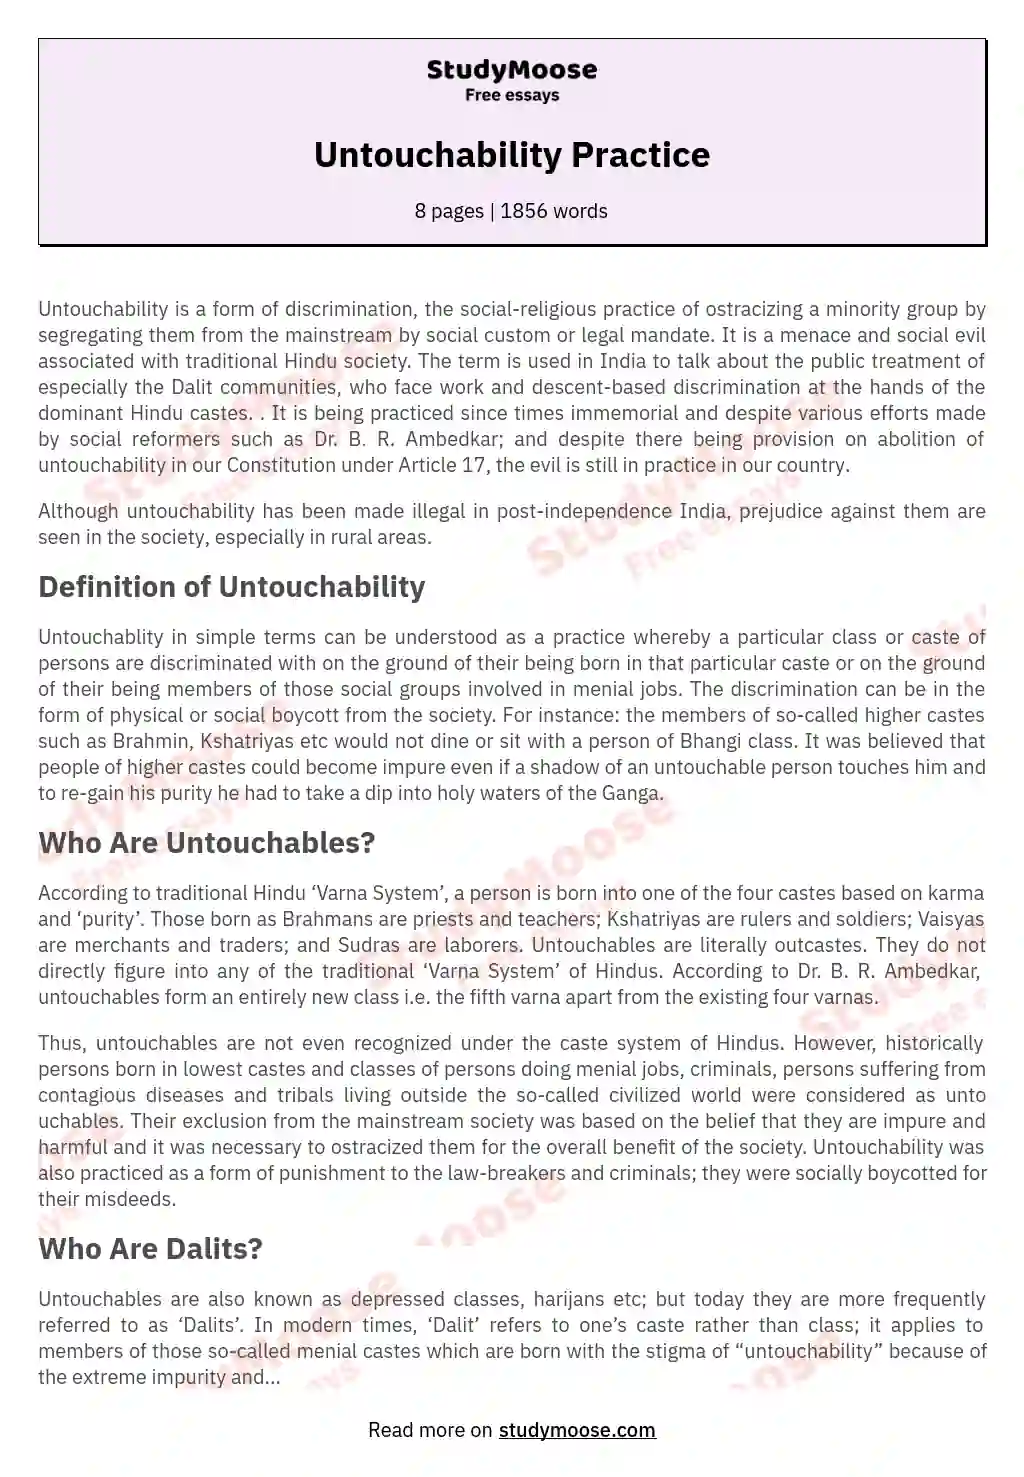 untouchability essay meaning in english